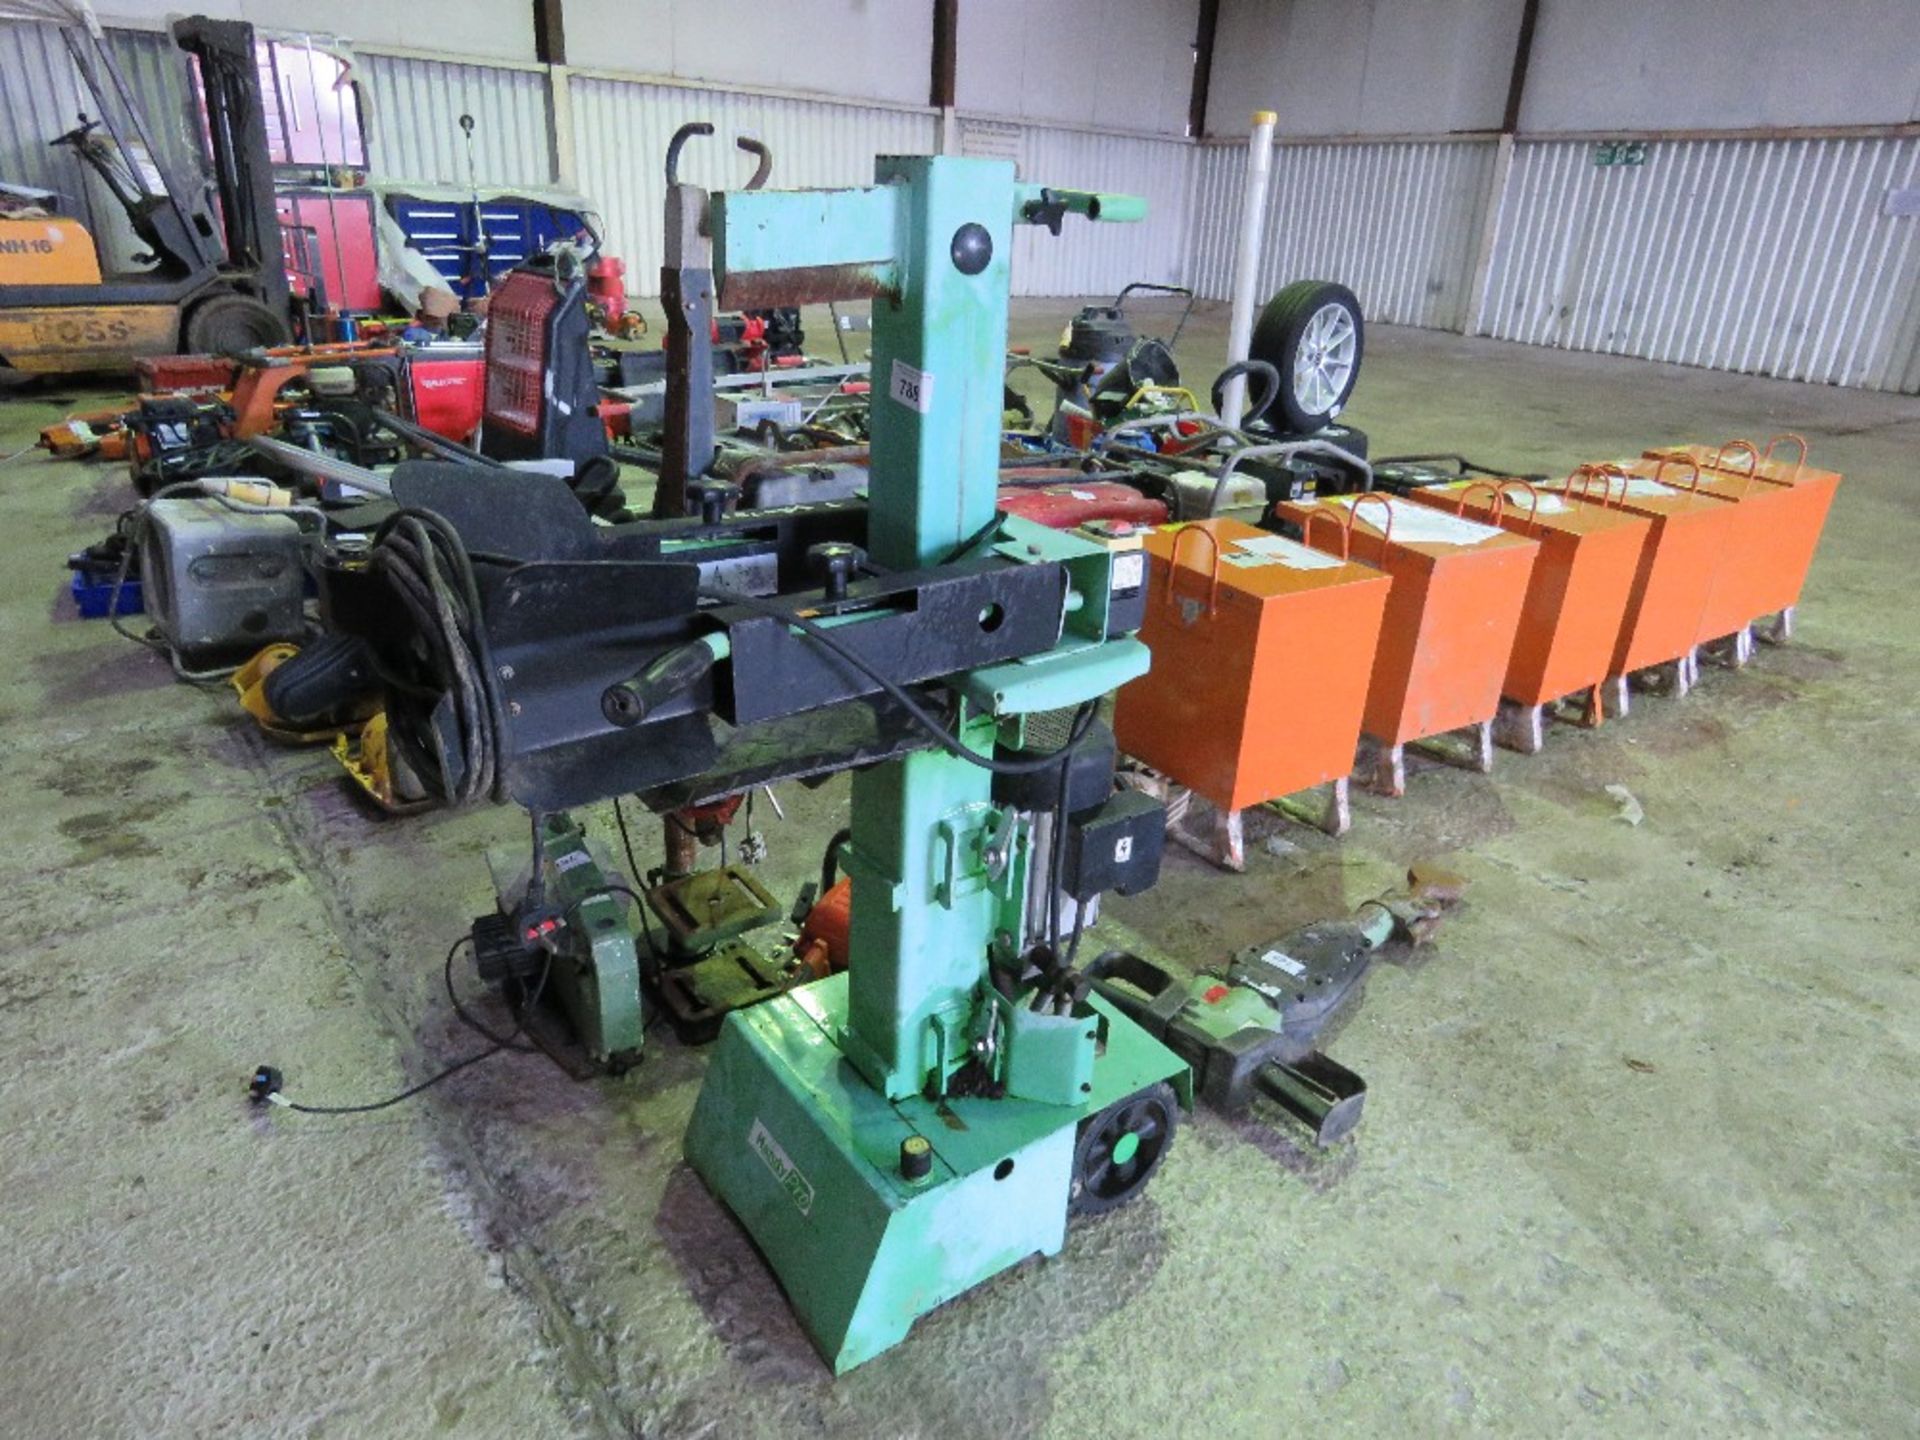 HANDYPRO 240VOLT POWERED UPRIGHT LOG SPLITTER, CONDITION UNKNOWN. THIS LOT IS SOLD UNDER THE AUCT